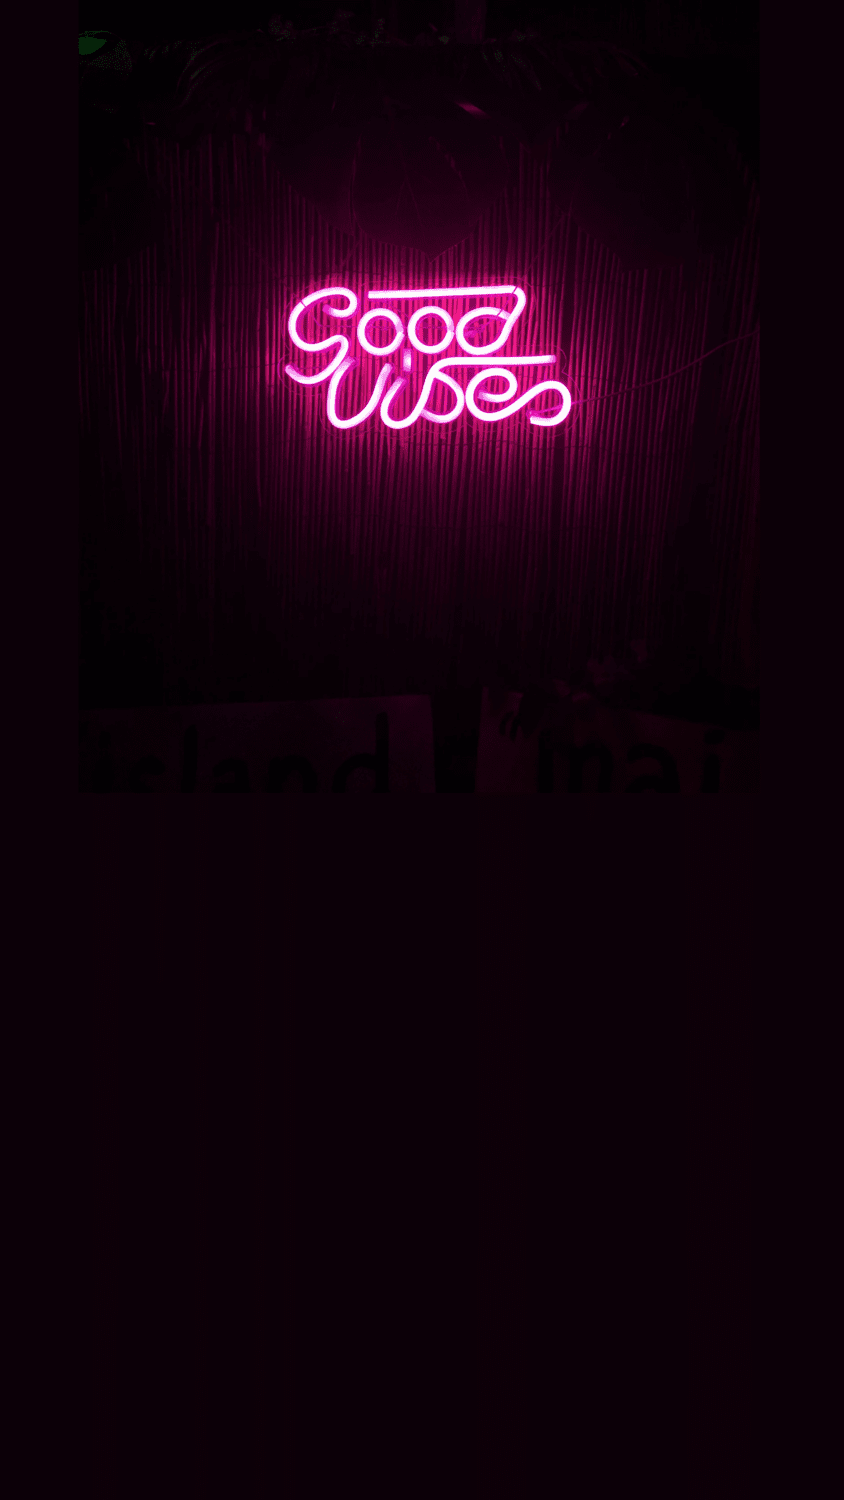 A neon sign that says good vibes - Hot pink, pink, neon pink